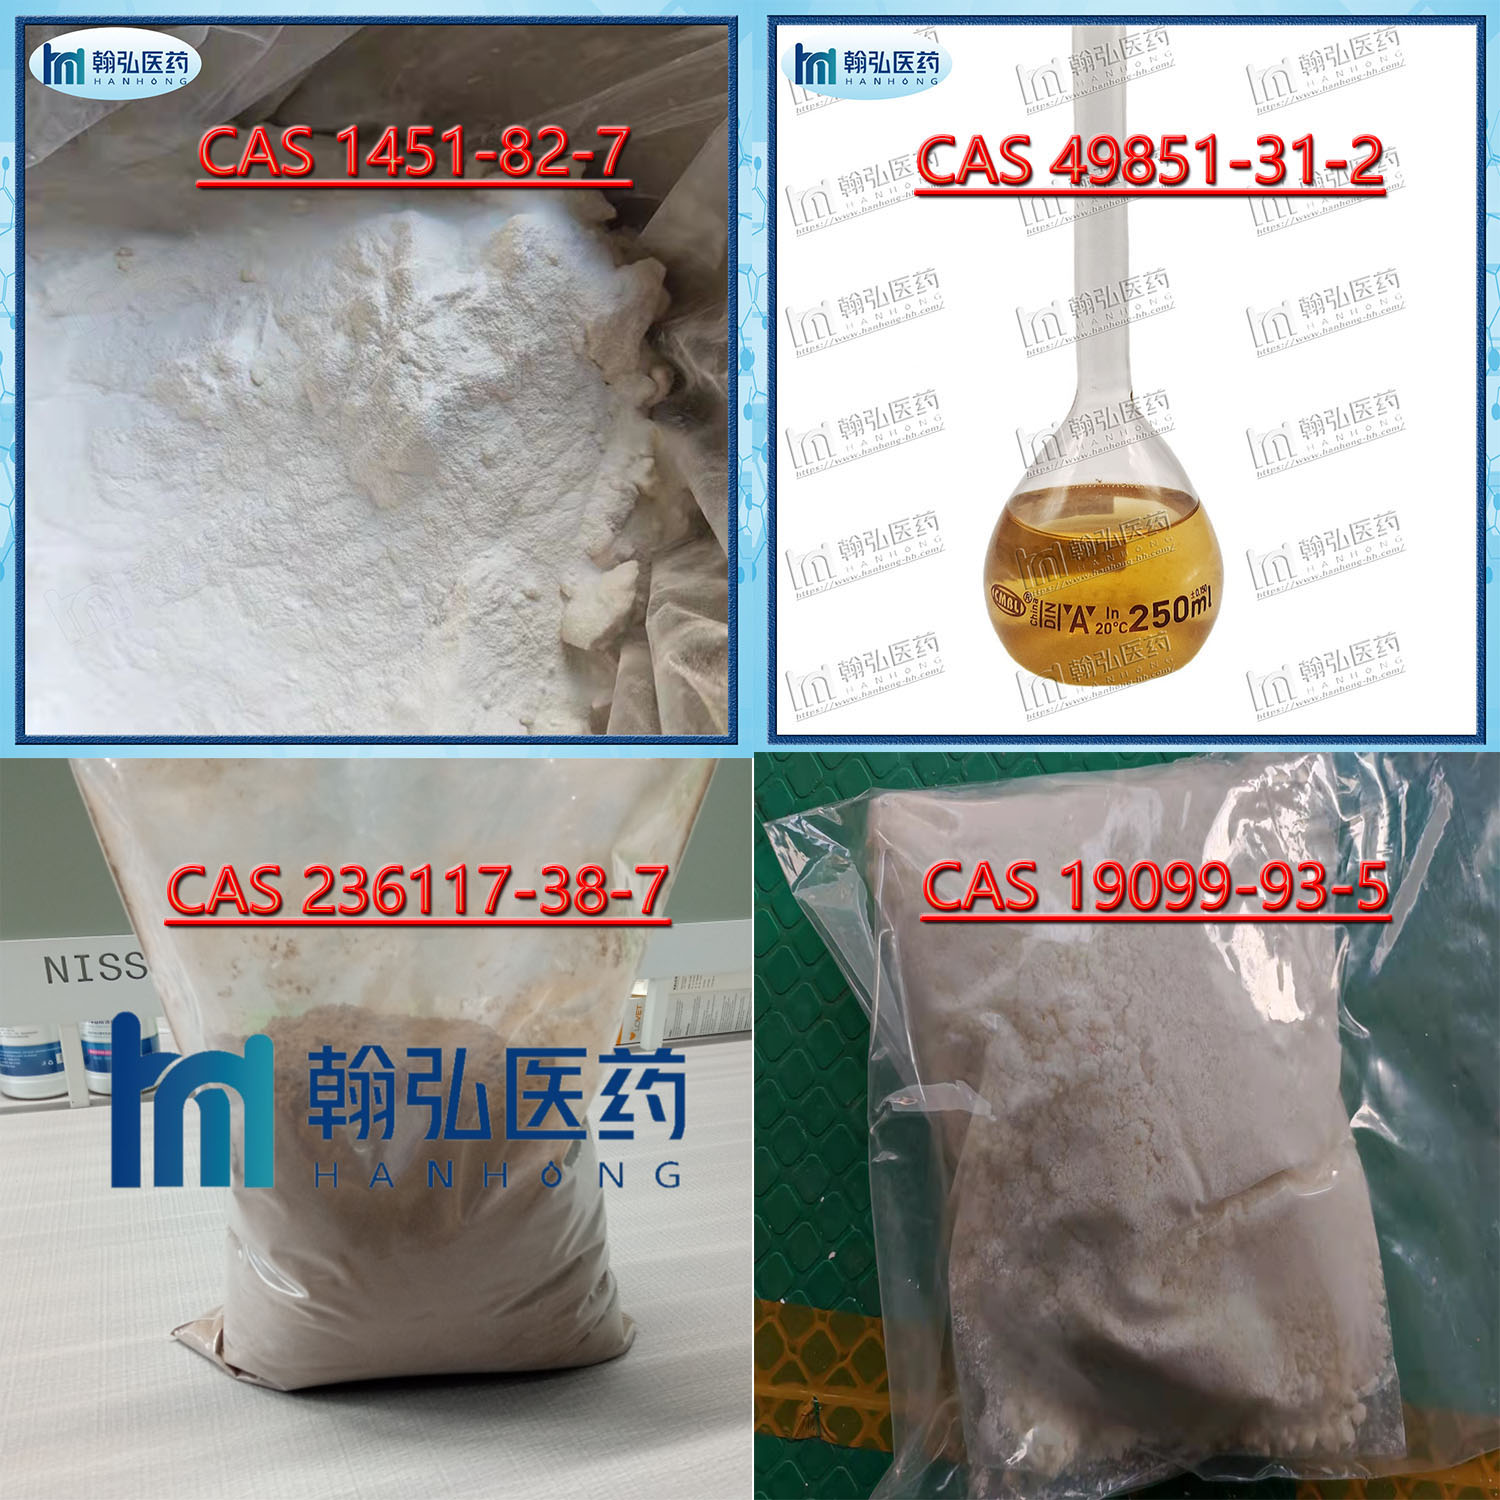 99.9% 2-Bromo-1-Phenyl-Pentan-1-One CAS 49851-31-2 2-Bromovalerophenone with Best Price/1451-82-7/1451-83-8/236117-38-7/59774(WhatsApp/WeChat: +8615927457486 WickrMe: Ccassie